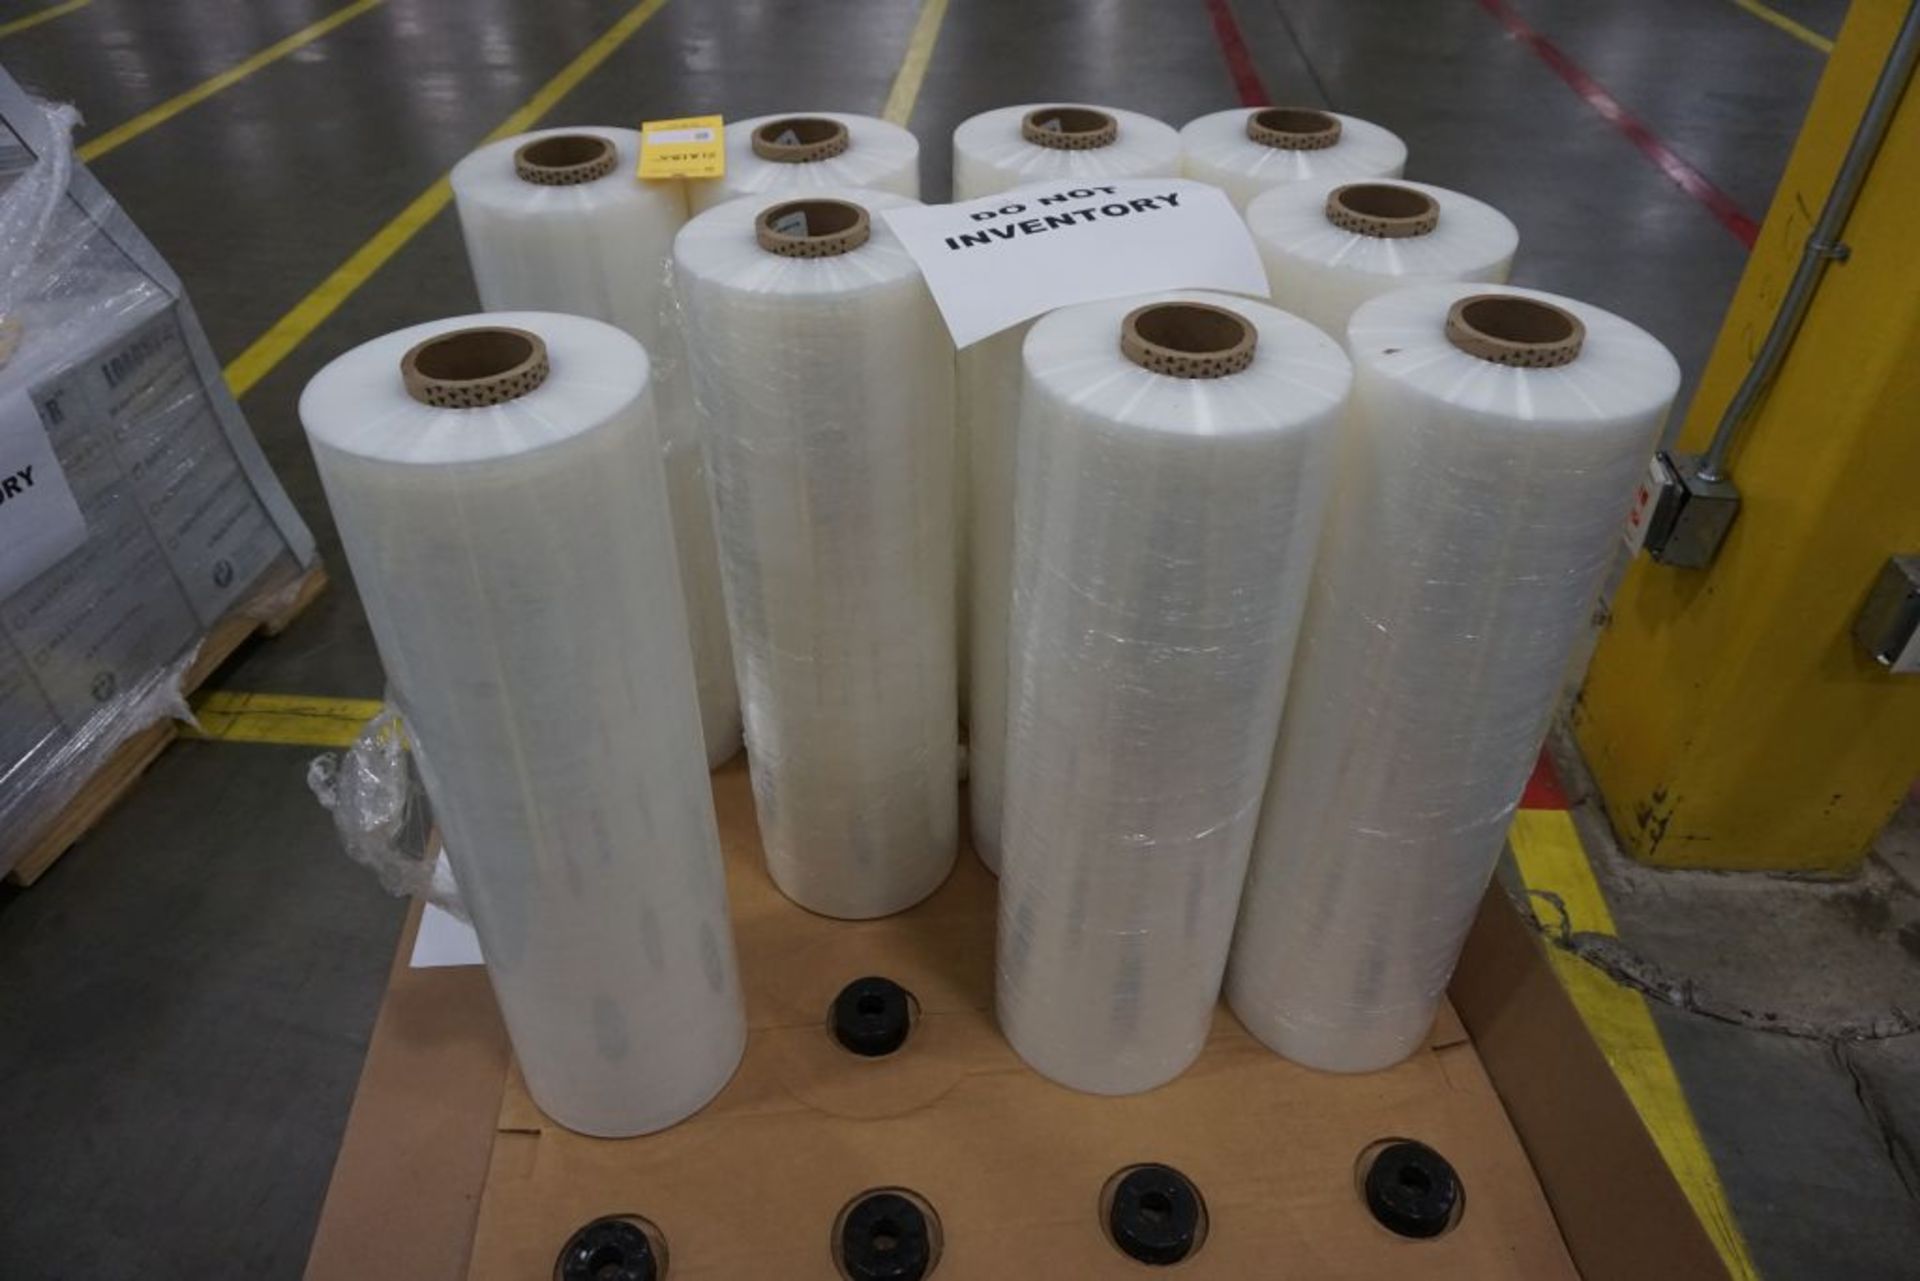 Lot of (11) Rolls of Global Force Stretch Wrap - GF 127750; Tag: 218185; Lot Loading Fee: $30 - Image 2 of 2